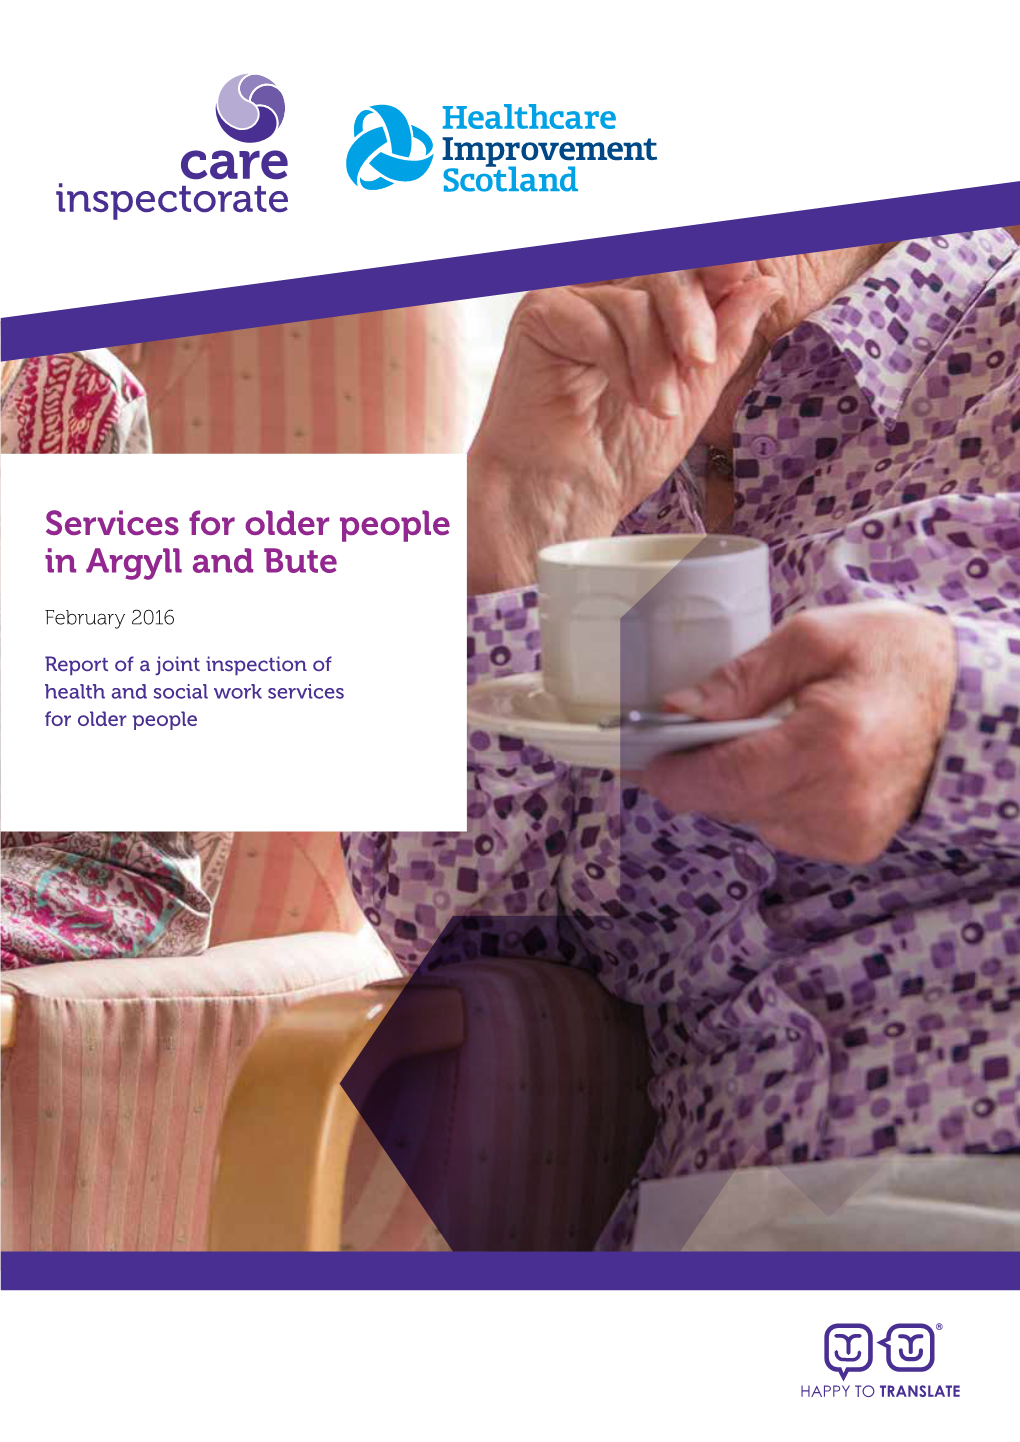 Services for Older People in Argyll and Bute